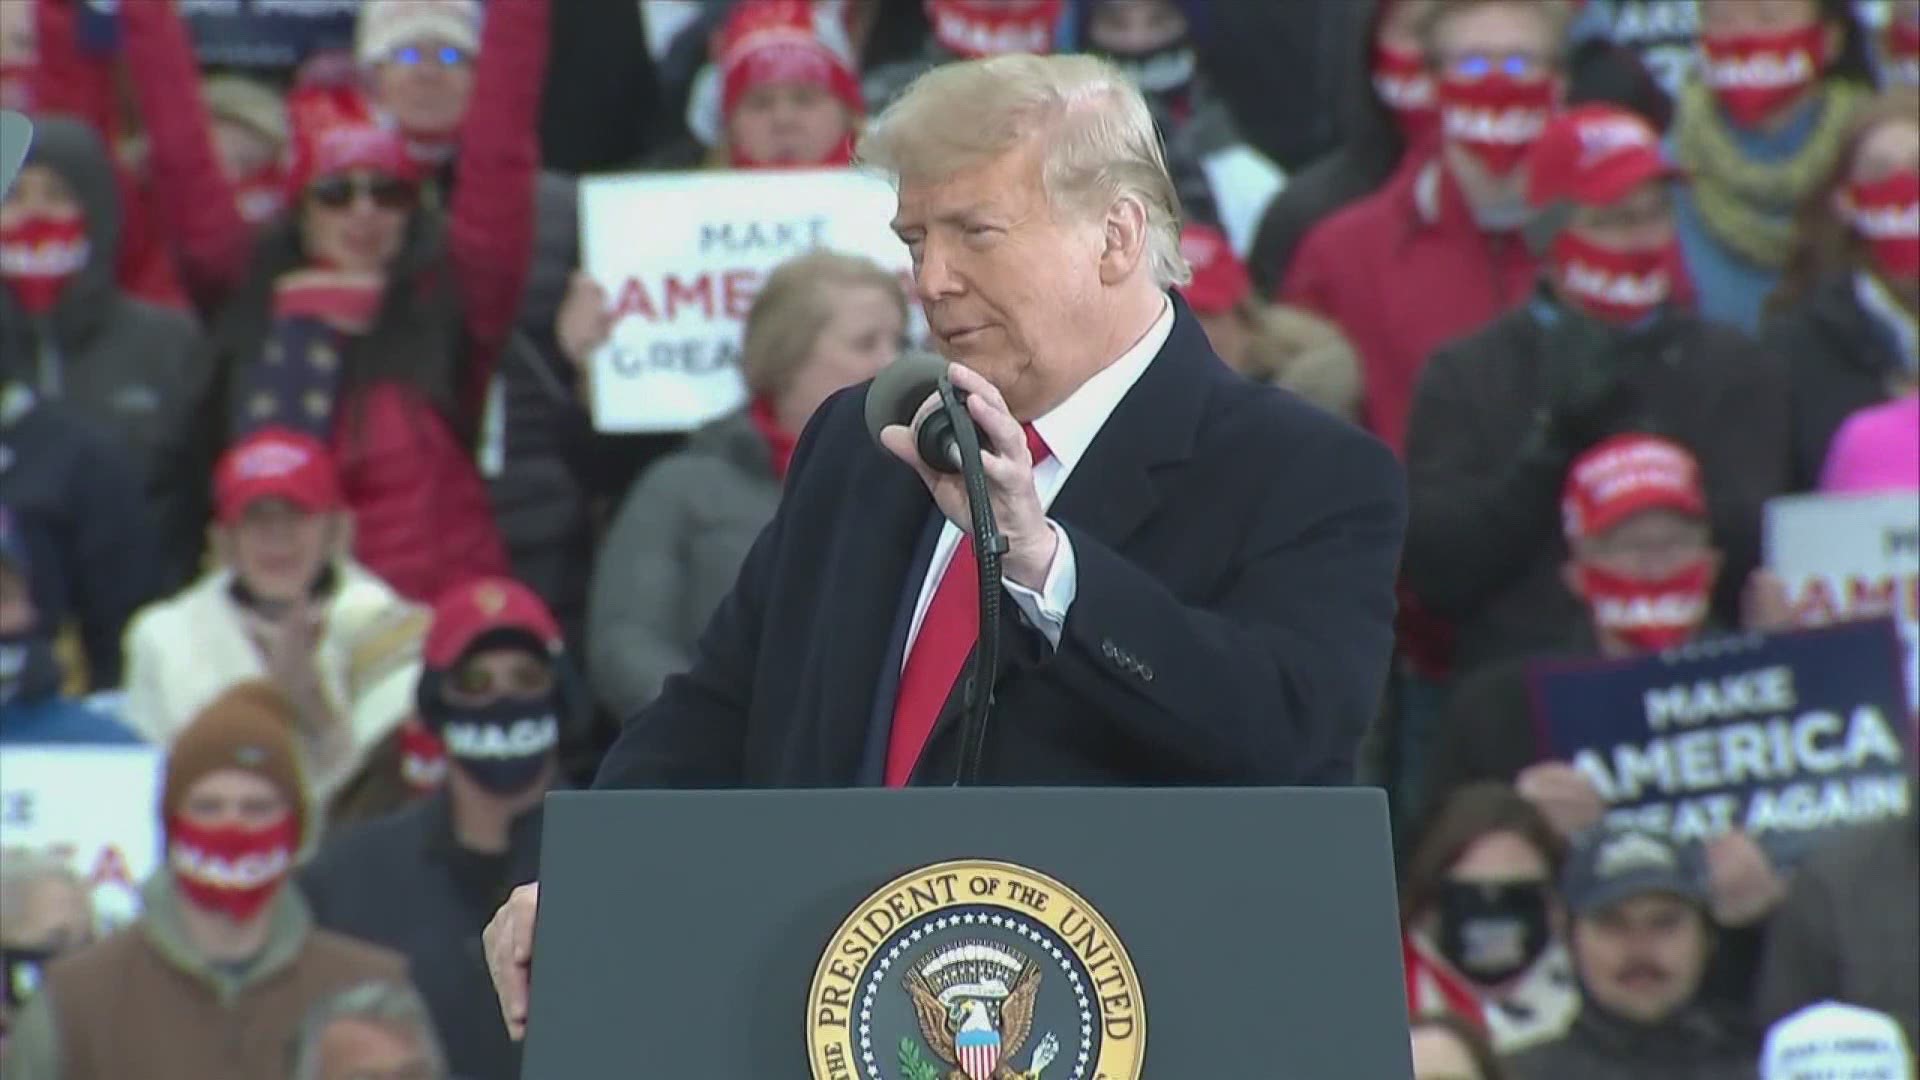 Trump criticized Whitmer's handling of the pandemic Saturday. She responded Sunday saying the president is inciting violence.